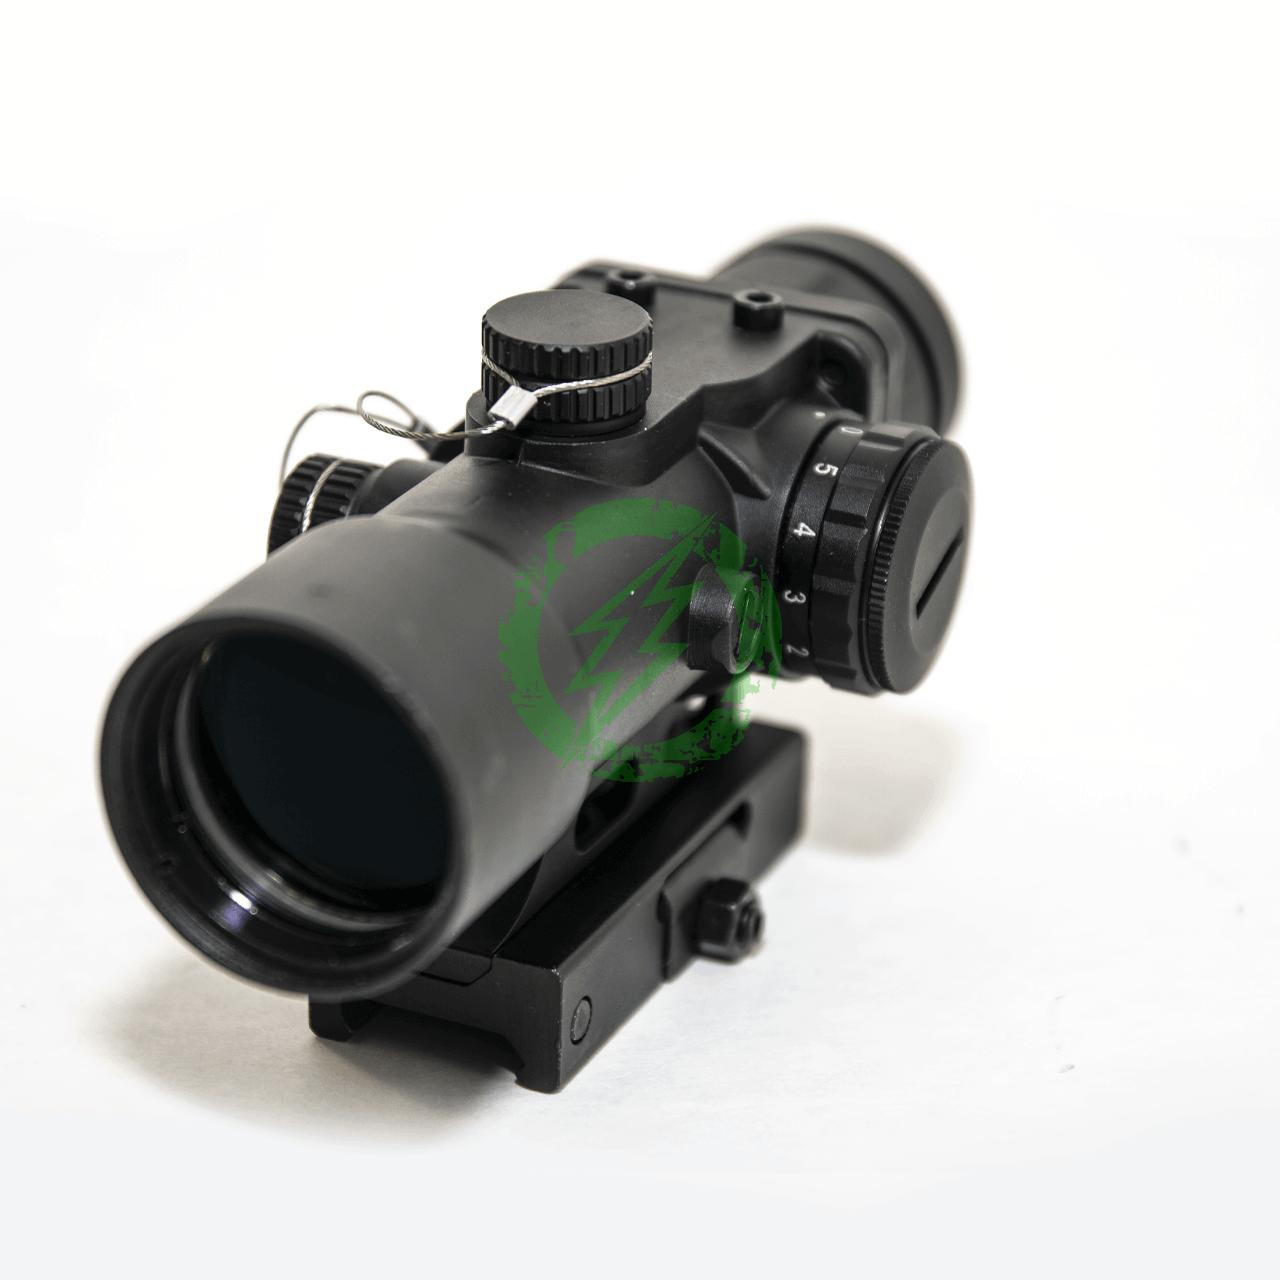  NC Star  Compact Prismatic Scope 3.5x32 w/ Blue-Green Reticle 